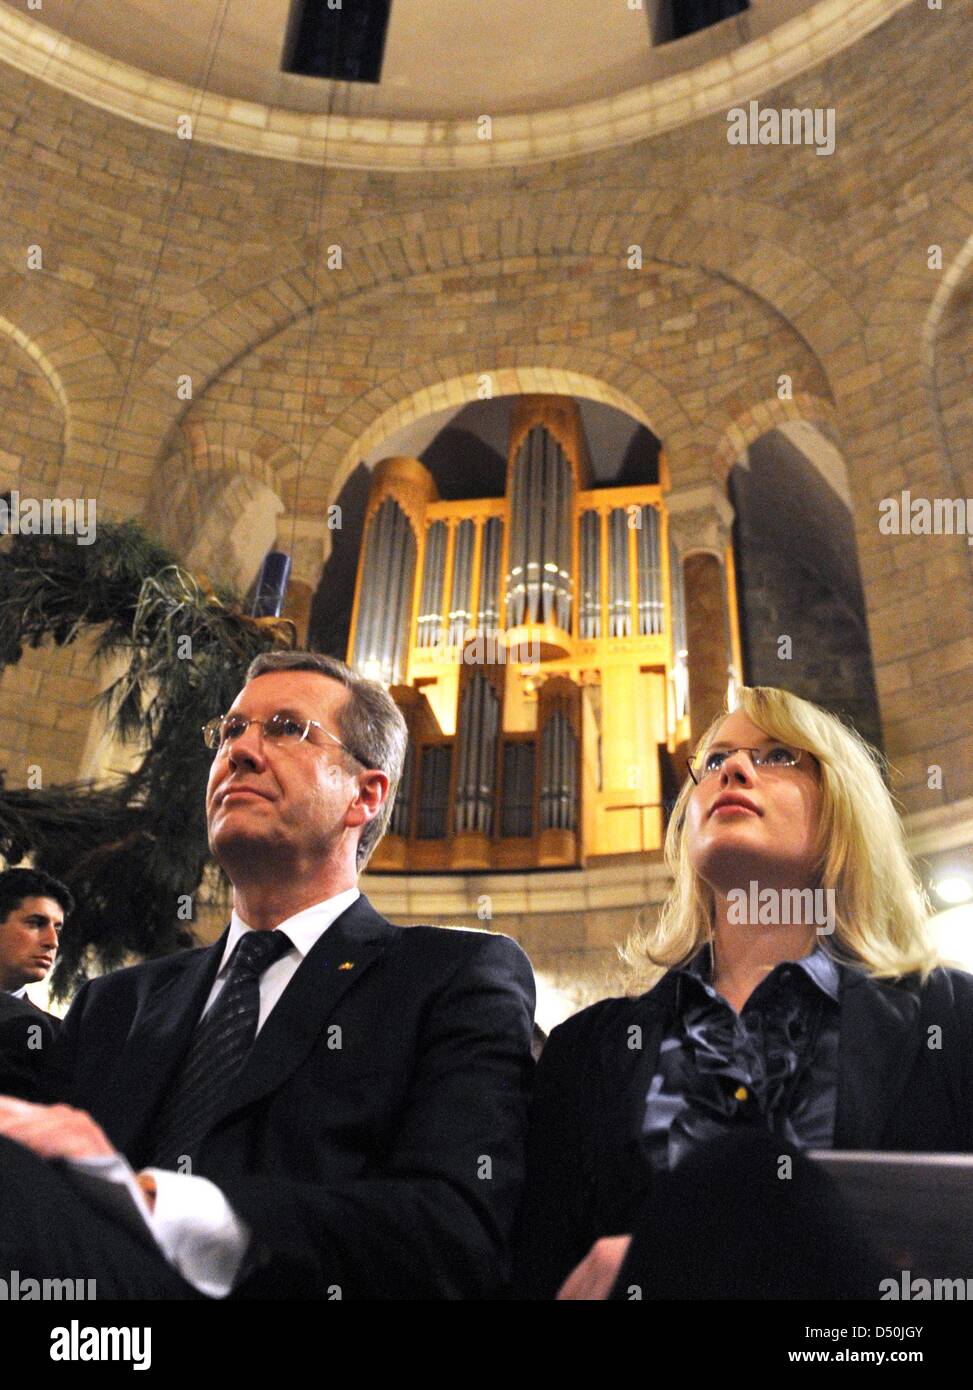 German President Christian Wulff and his daughter Annalena attend an ecumenical sevice on the first sunday in Advent at Dormitio Abbey in Jerusalem, Israel, 28 November 2010. Every sunday, German language services are held at that church. Wulff's state visits will end in the Palestinian territories in Tuesday 20 November. Photo: RAINER JENSEN Stock Photo